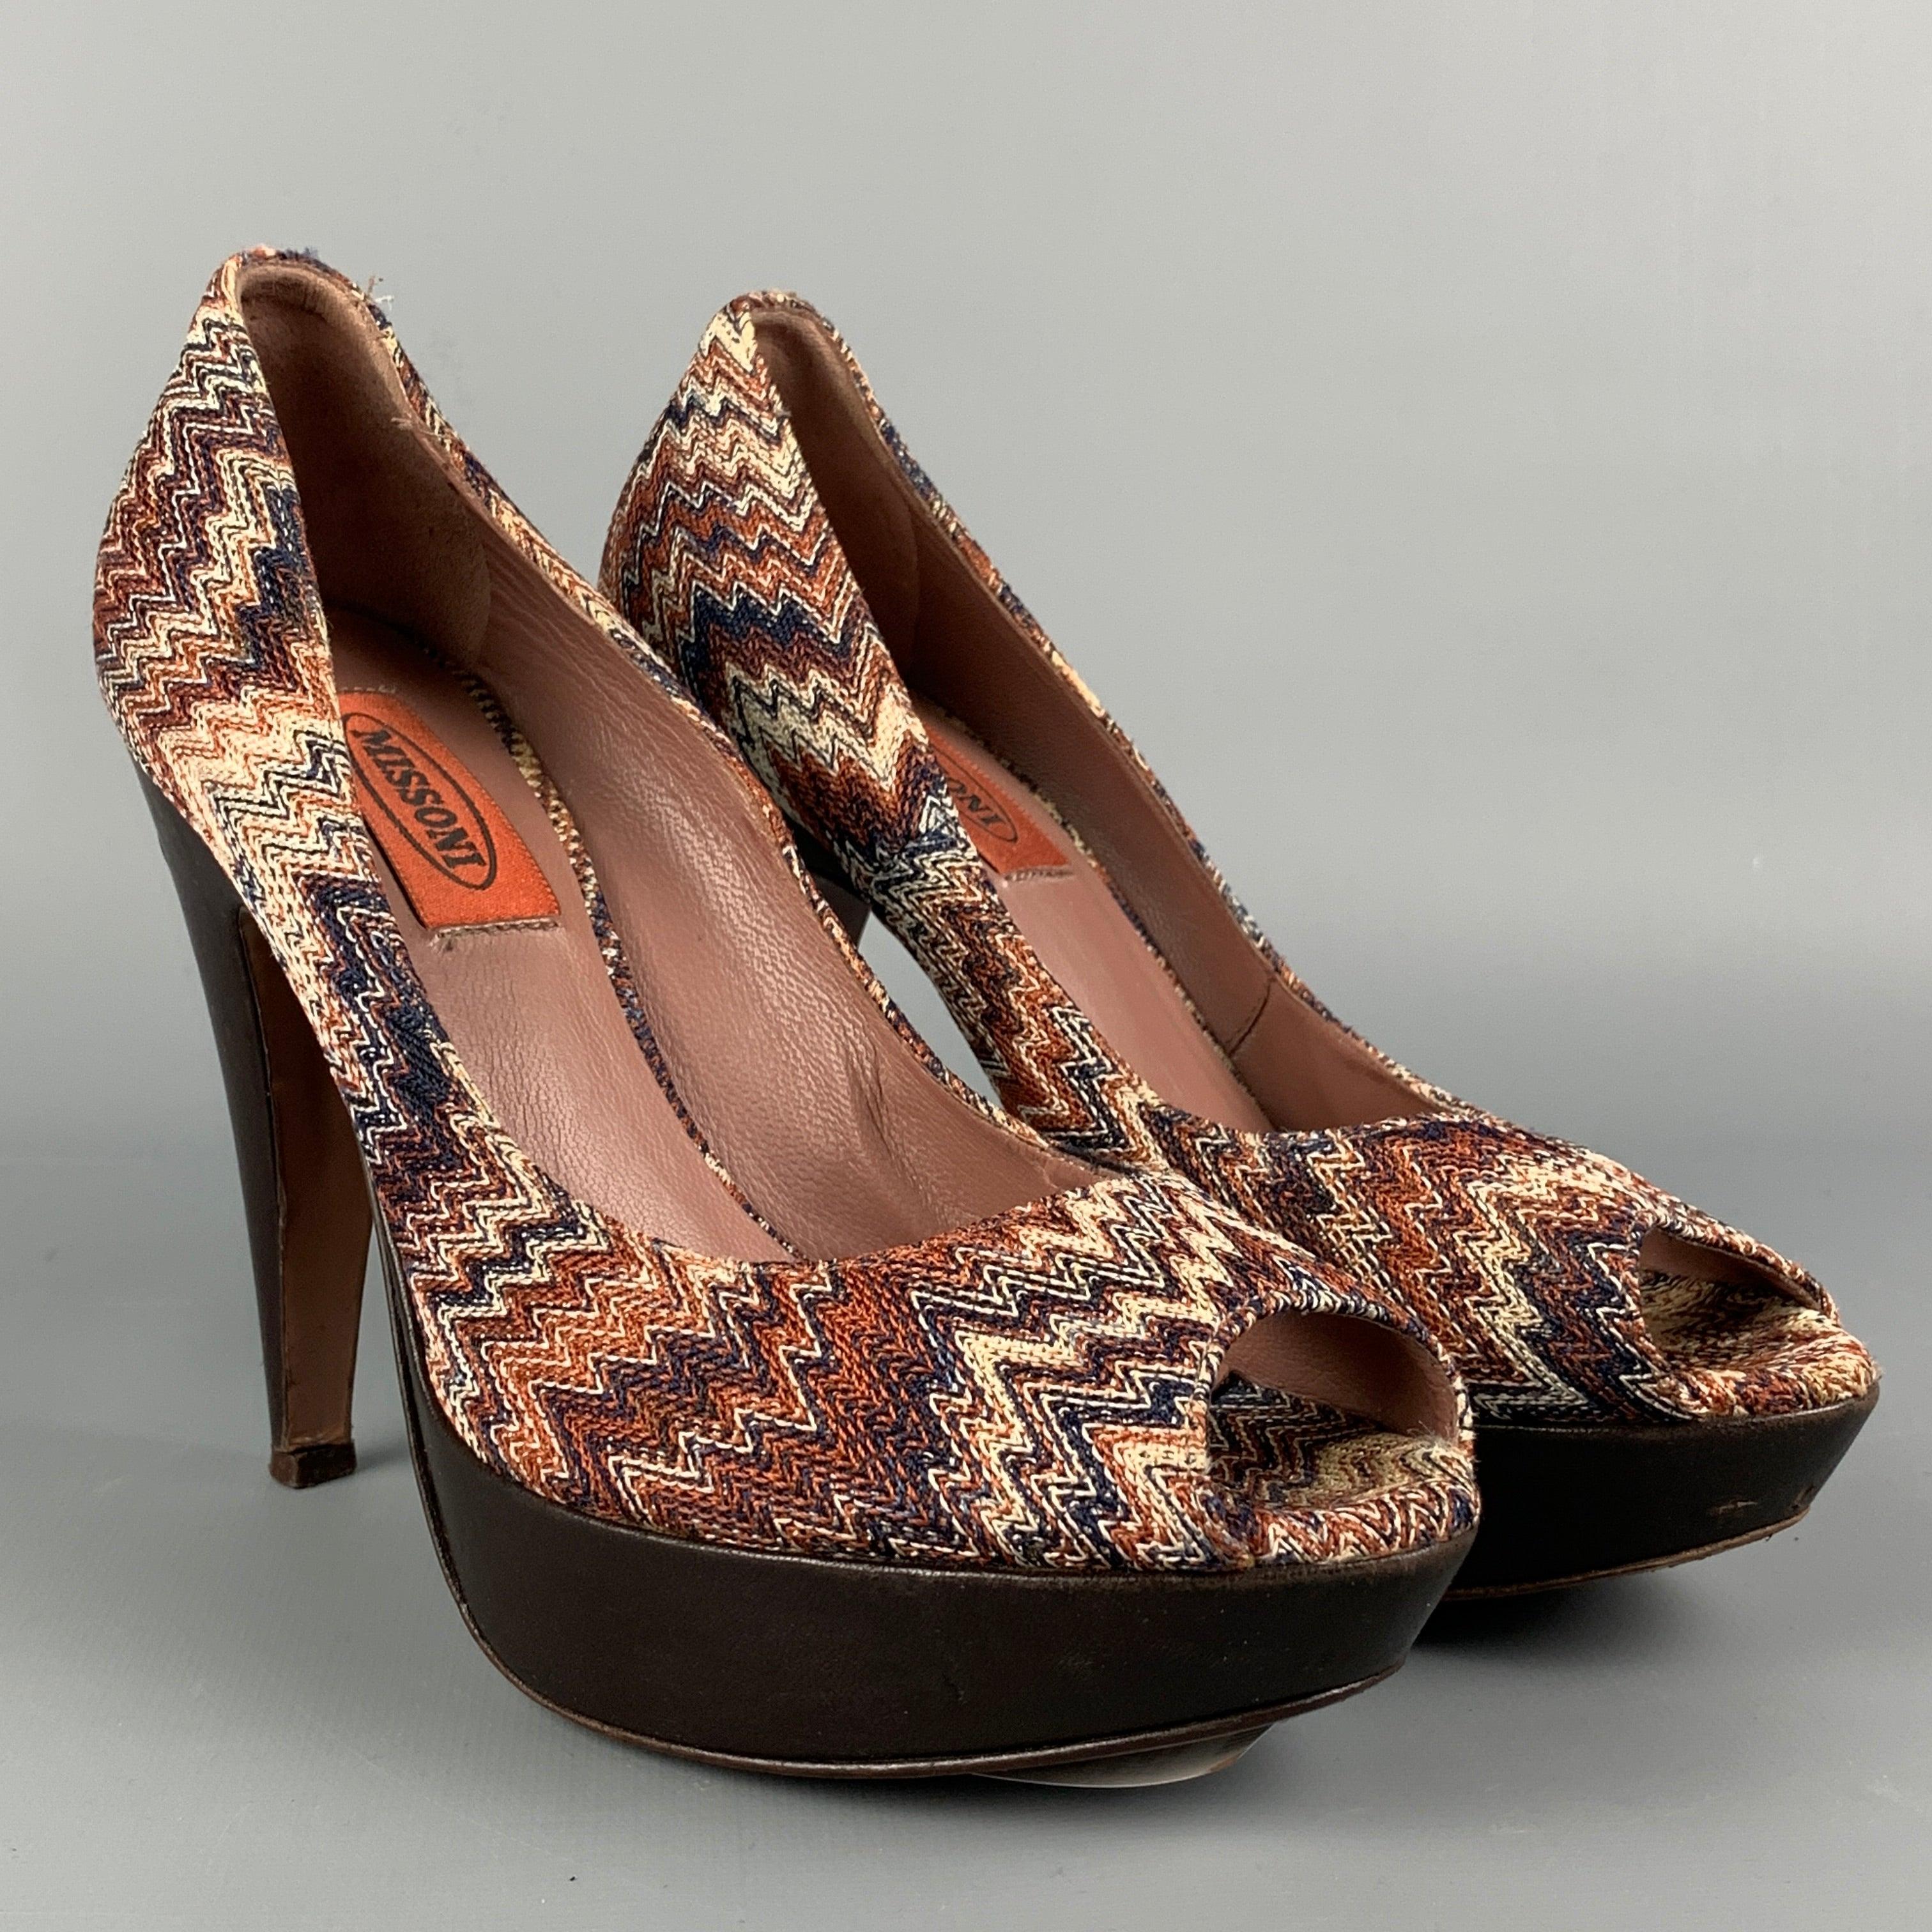 MISSONI pumps comes in a multi-color zig zag material featuring a peep toe, platform, and a covered heel. Made in Italy.
 Good
 Pre-Owned Condition. Minor wear.  
 

 Marked:  38 
 

 Measurements: 
  Heel: 4.5 inches Platform: 1 inches 
  
  
  
